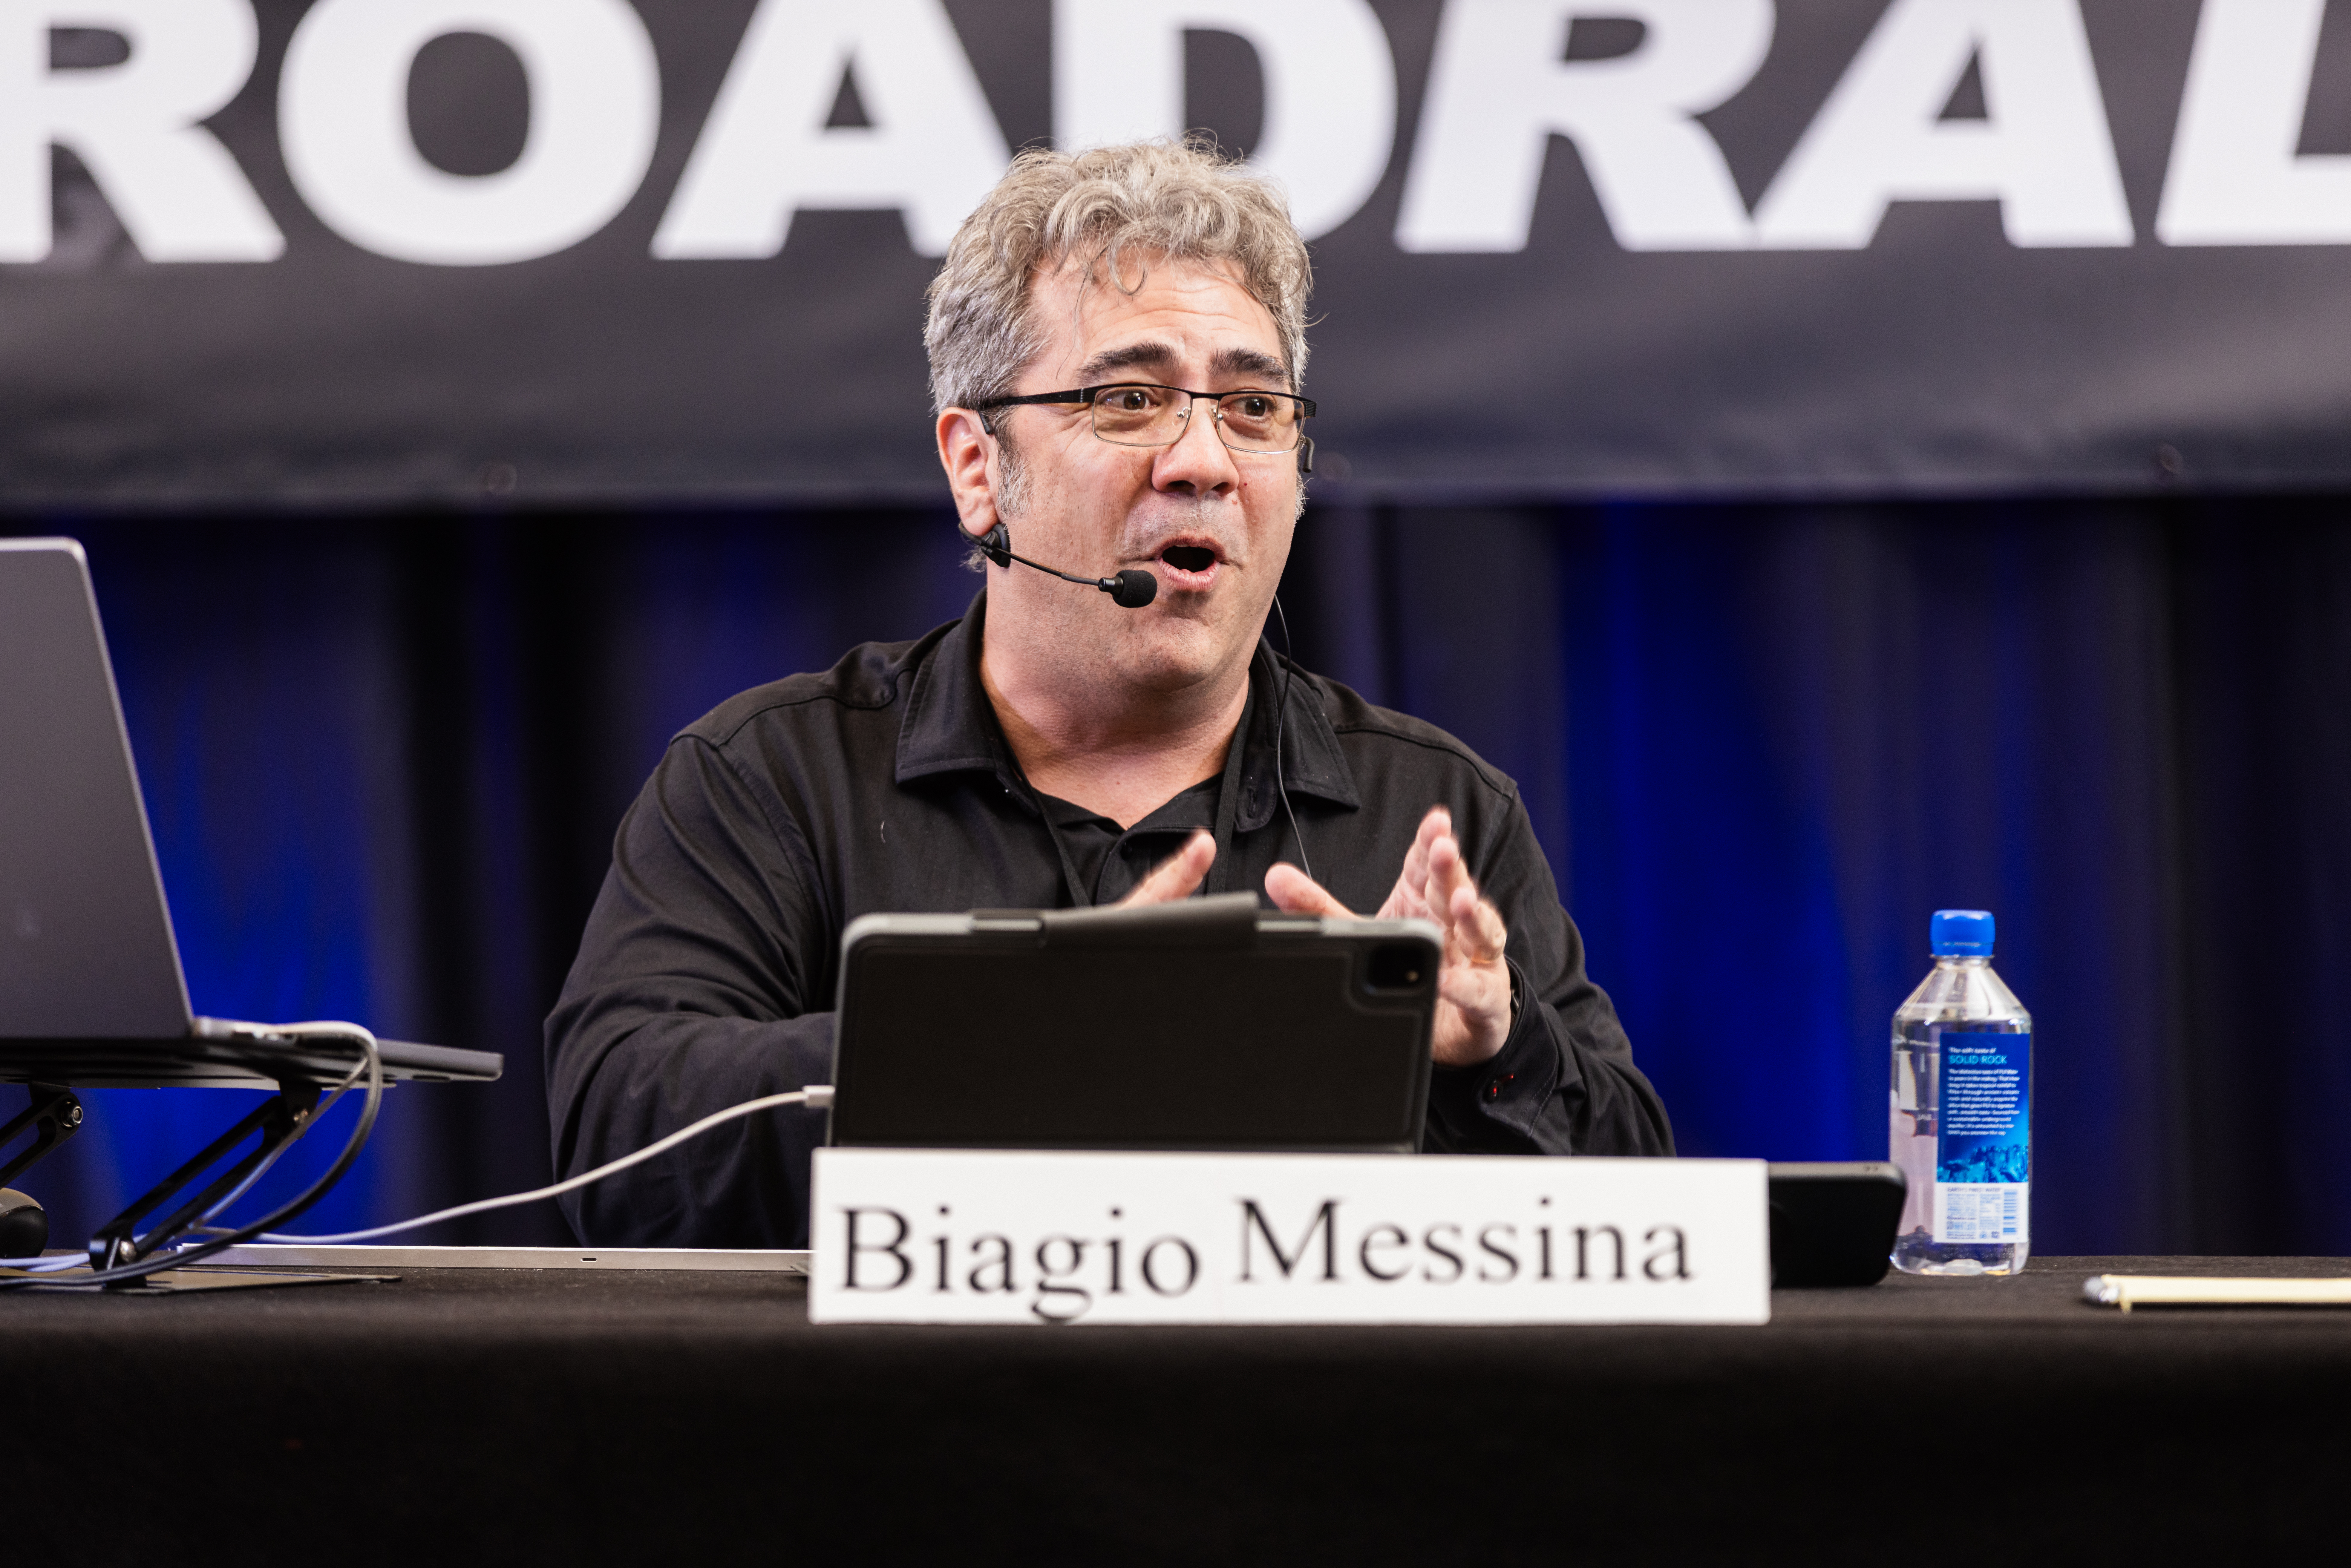 Biagio Messina is the Executive Producer of a whole bunch of TV shows and documentaries. He also happens to be a TV composer and video editor as well. When he gave a fantastic presentation on some creative uses for stems, the audience was mesmerized!